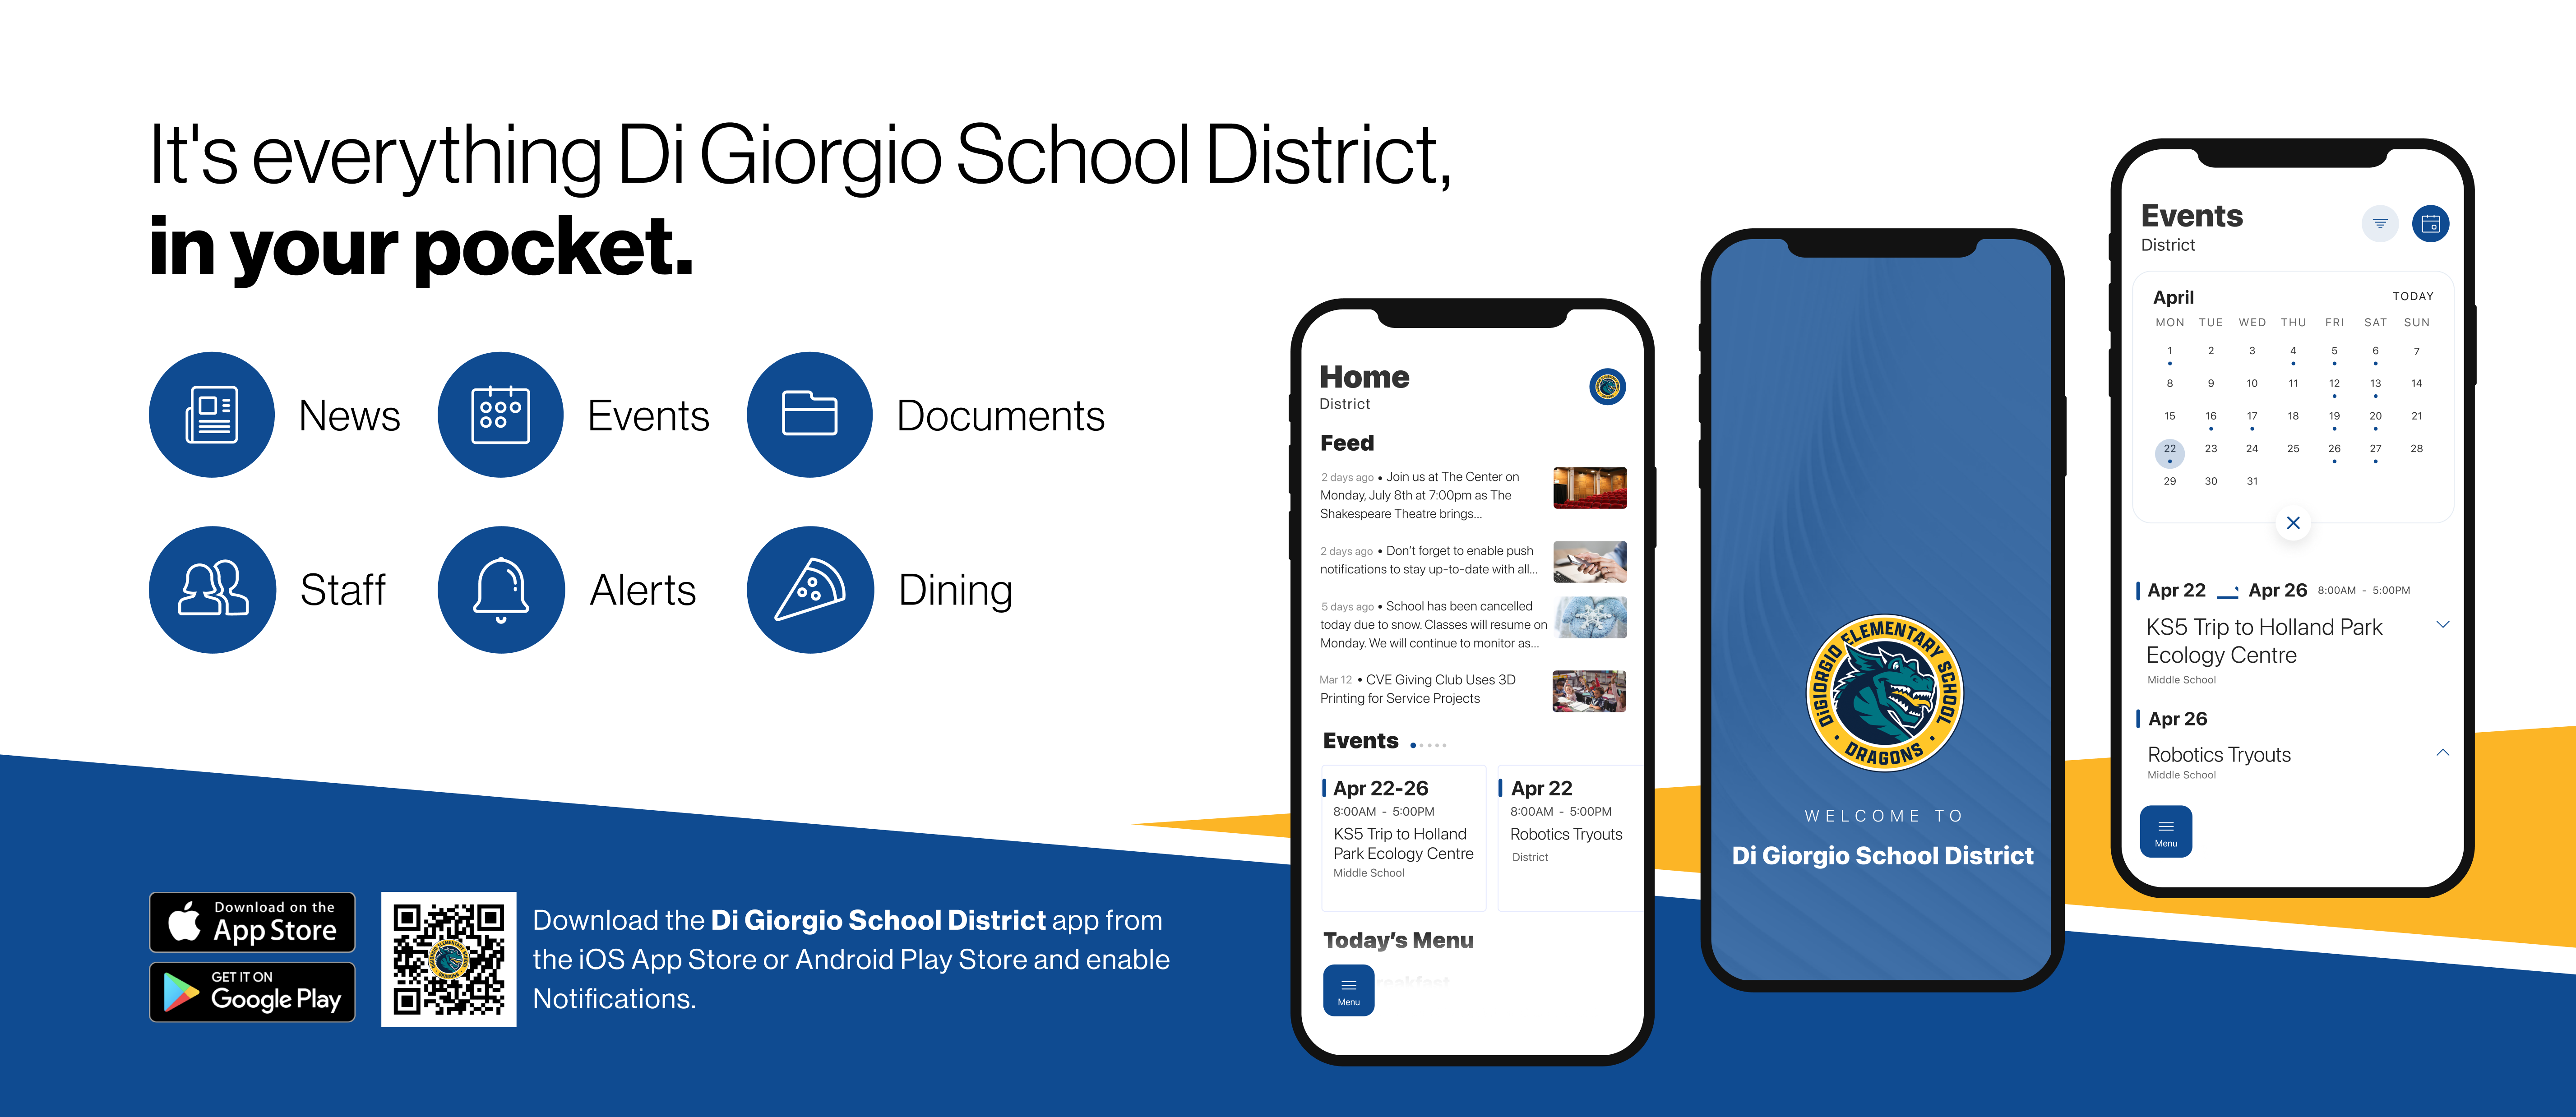 Download the Di Giorgio School District app from the iOS App Store or Android Play Store and enable Notifications. It's everything Di Giorgio School District, in your pocket. News Events 日 Documents Staff Alerts Dining 